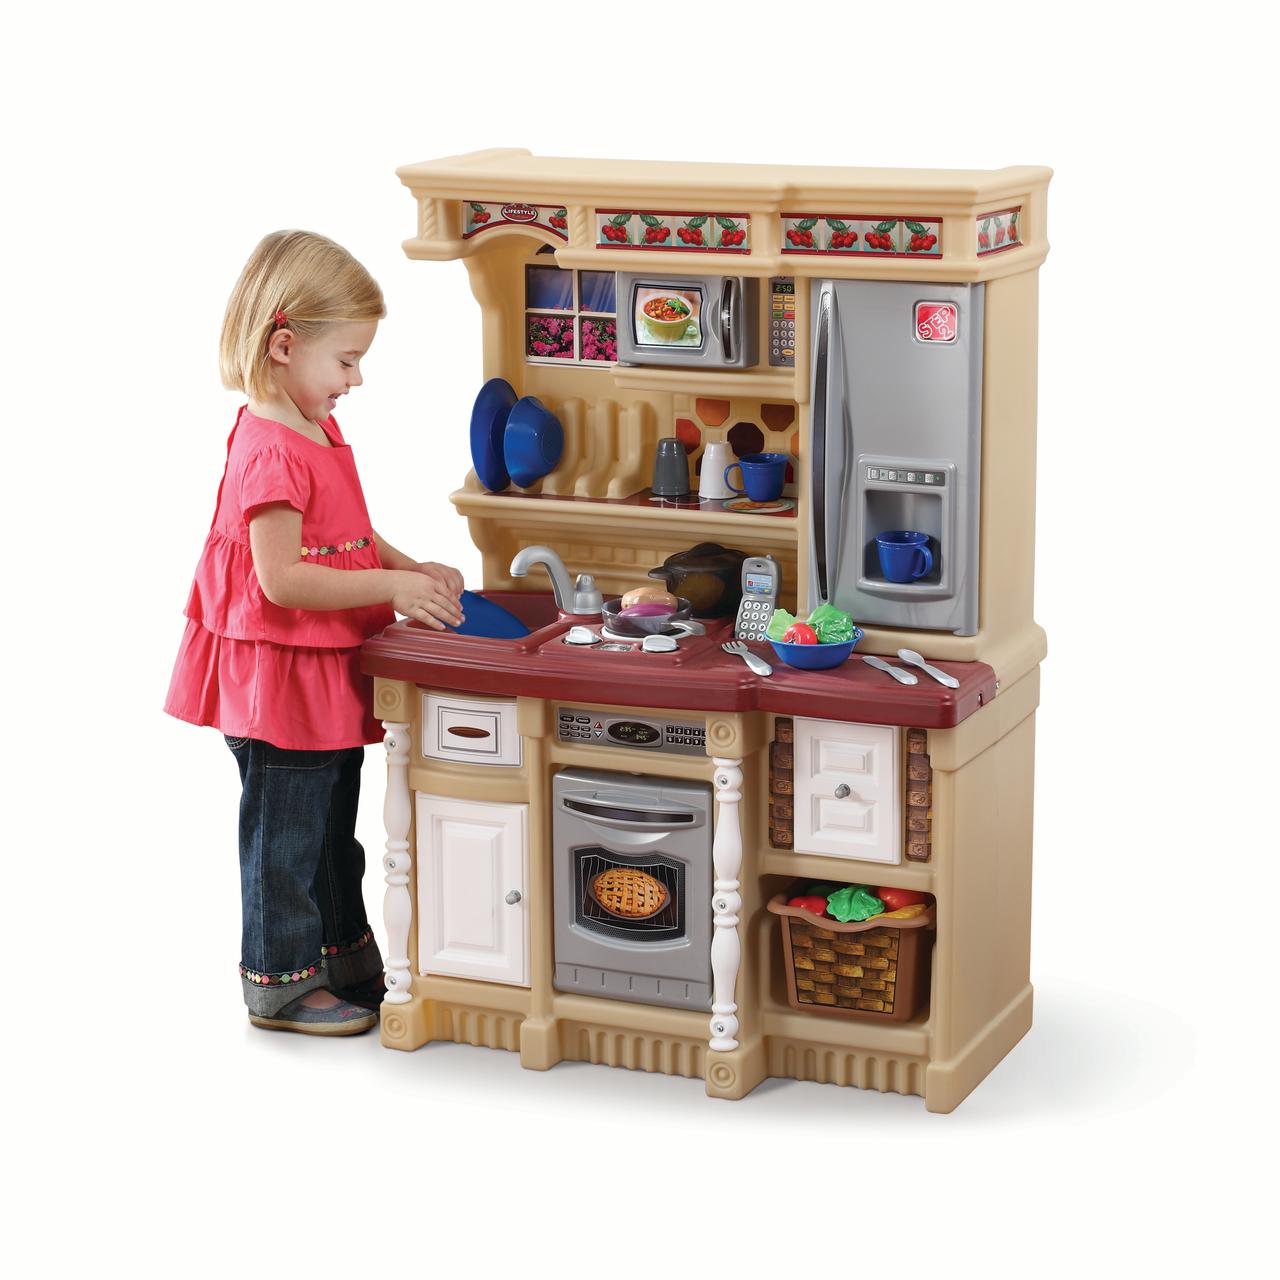 Step2 LifeStyle Custom Play Kitchen with 20 Piece Accessory Play Set - Tan - image 3 of 3